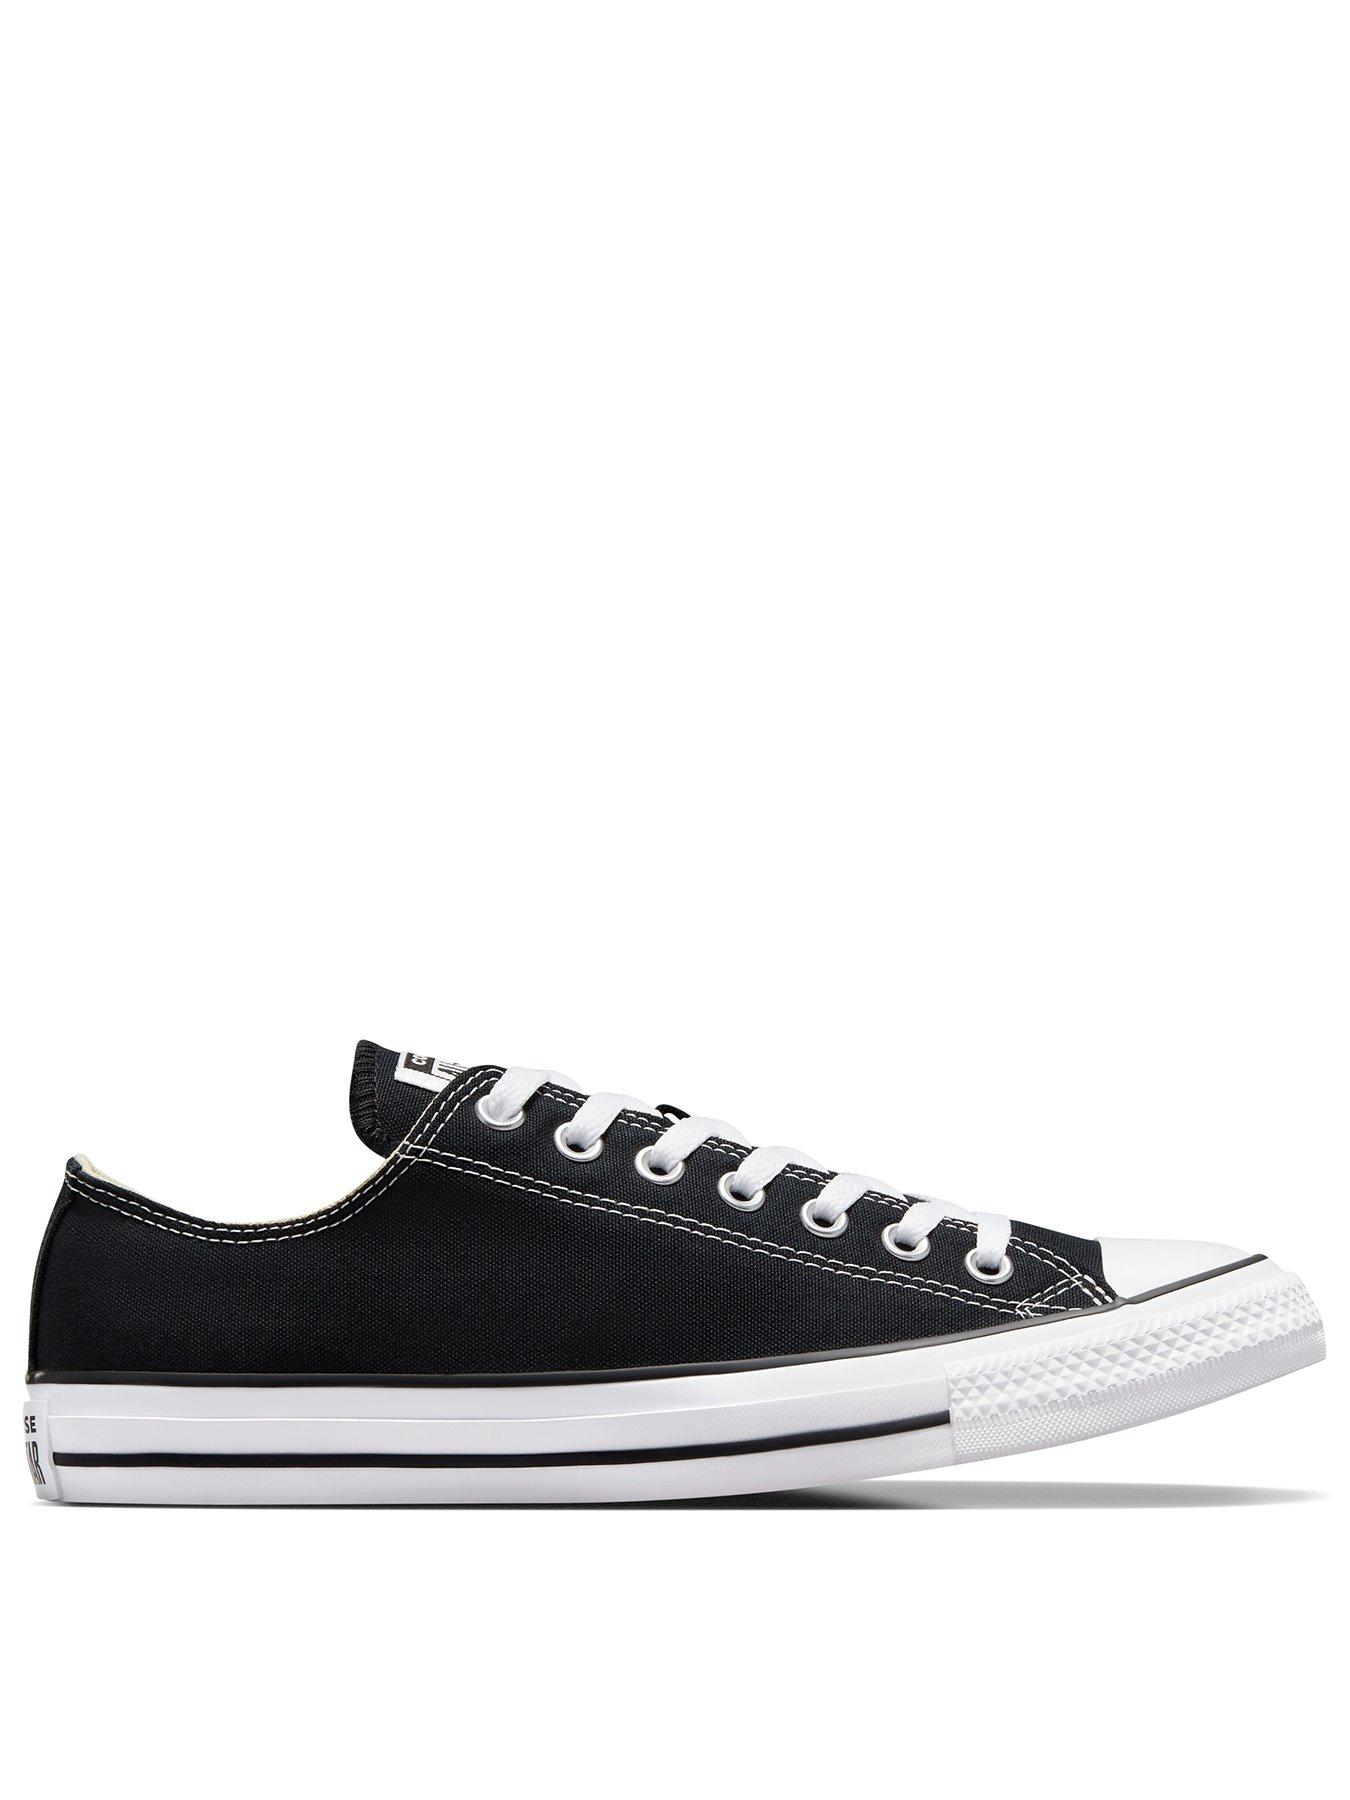 Converse Chuck Taylor All Star Ox | Trainers | Men | www.very.co.uk